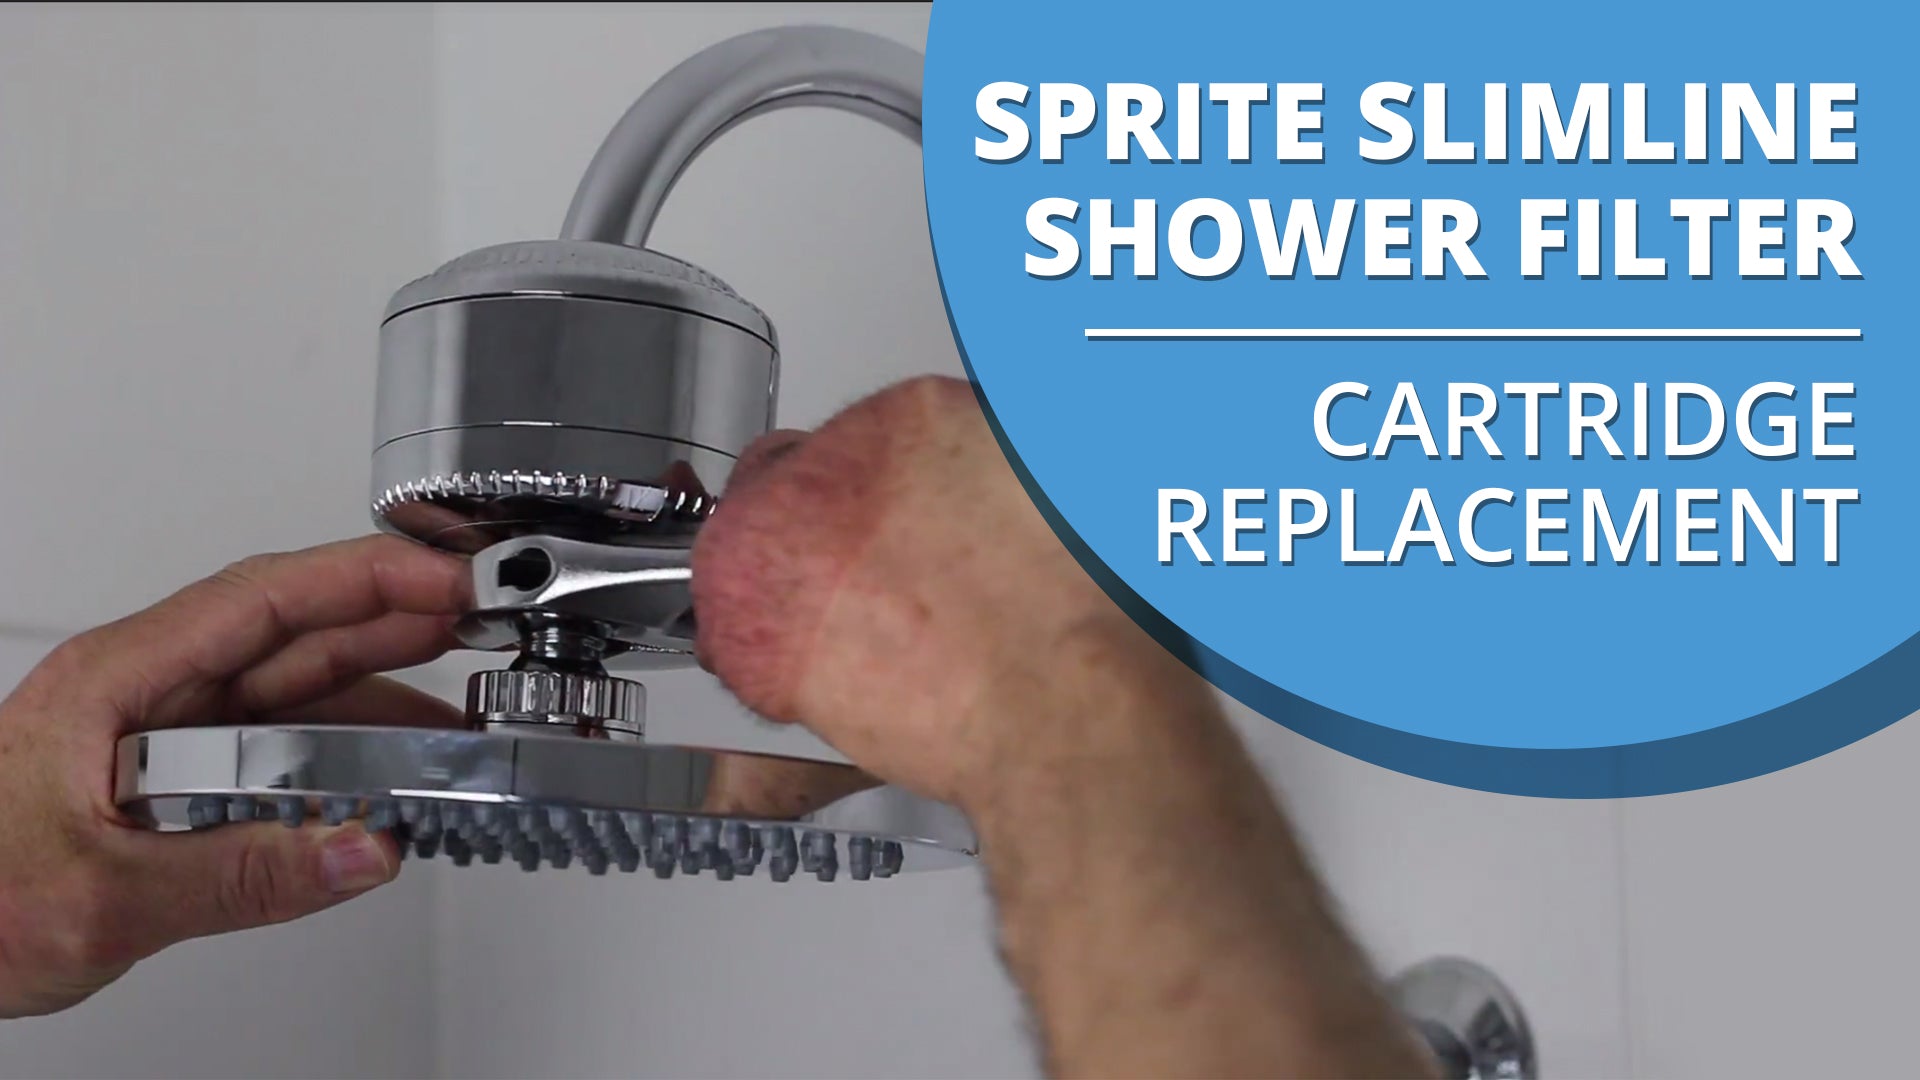 How to change the cartridge in your Sprite Slimline Shower Filter